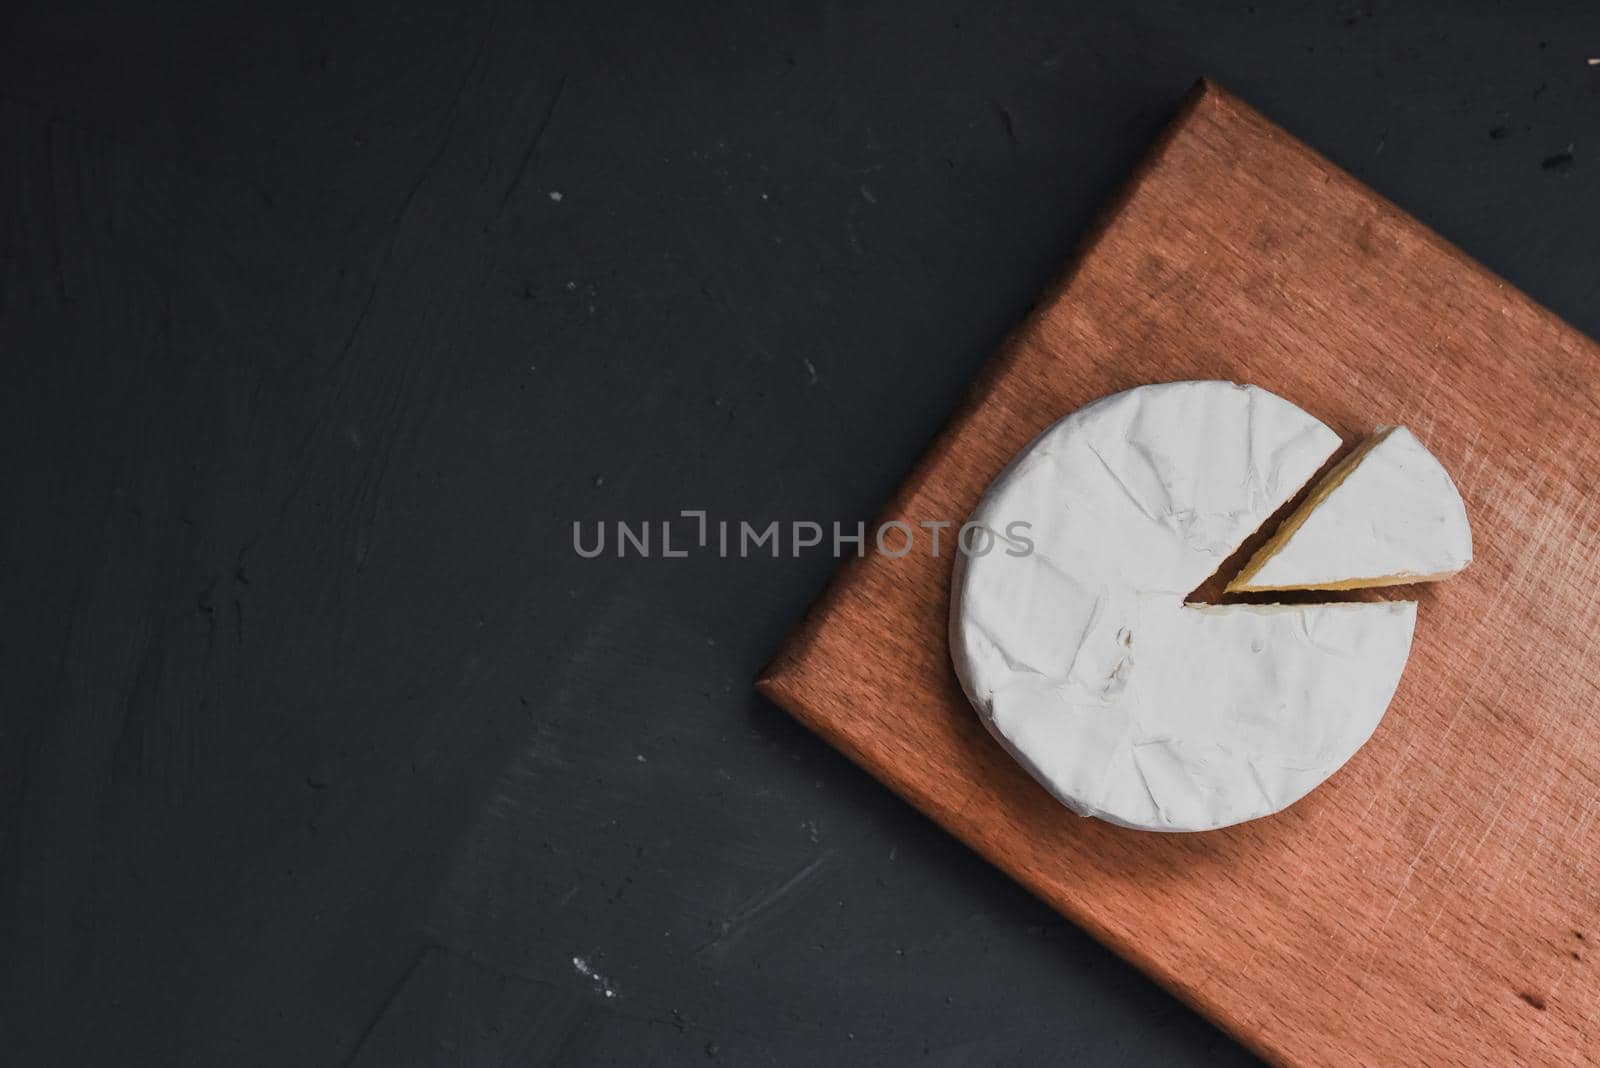 cheese camembert with mold on the wooden cutting board